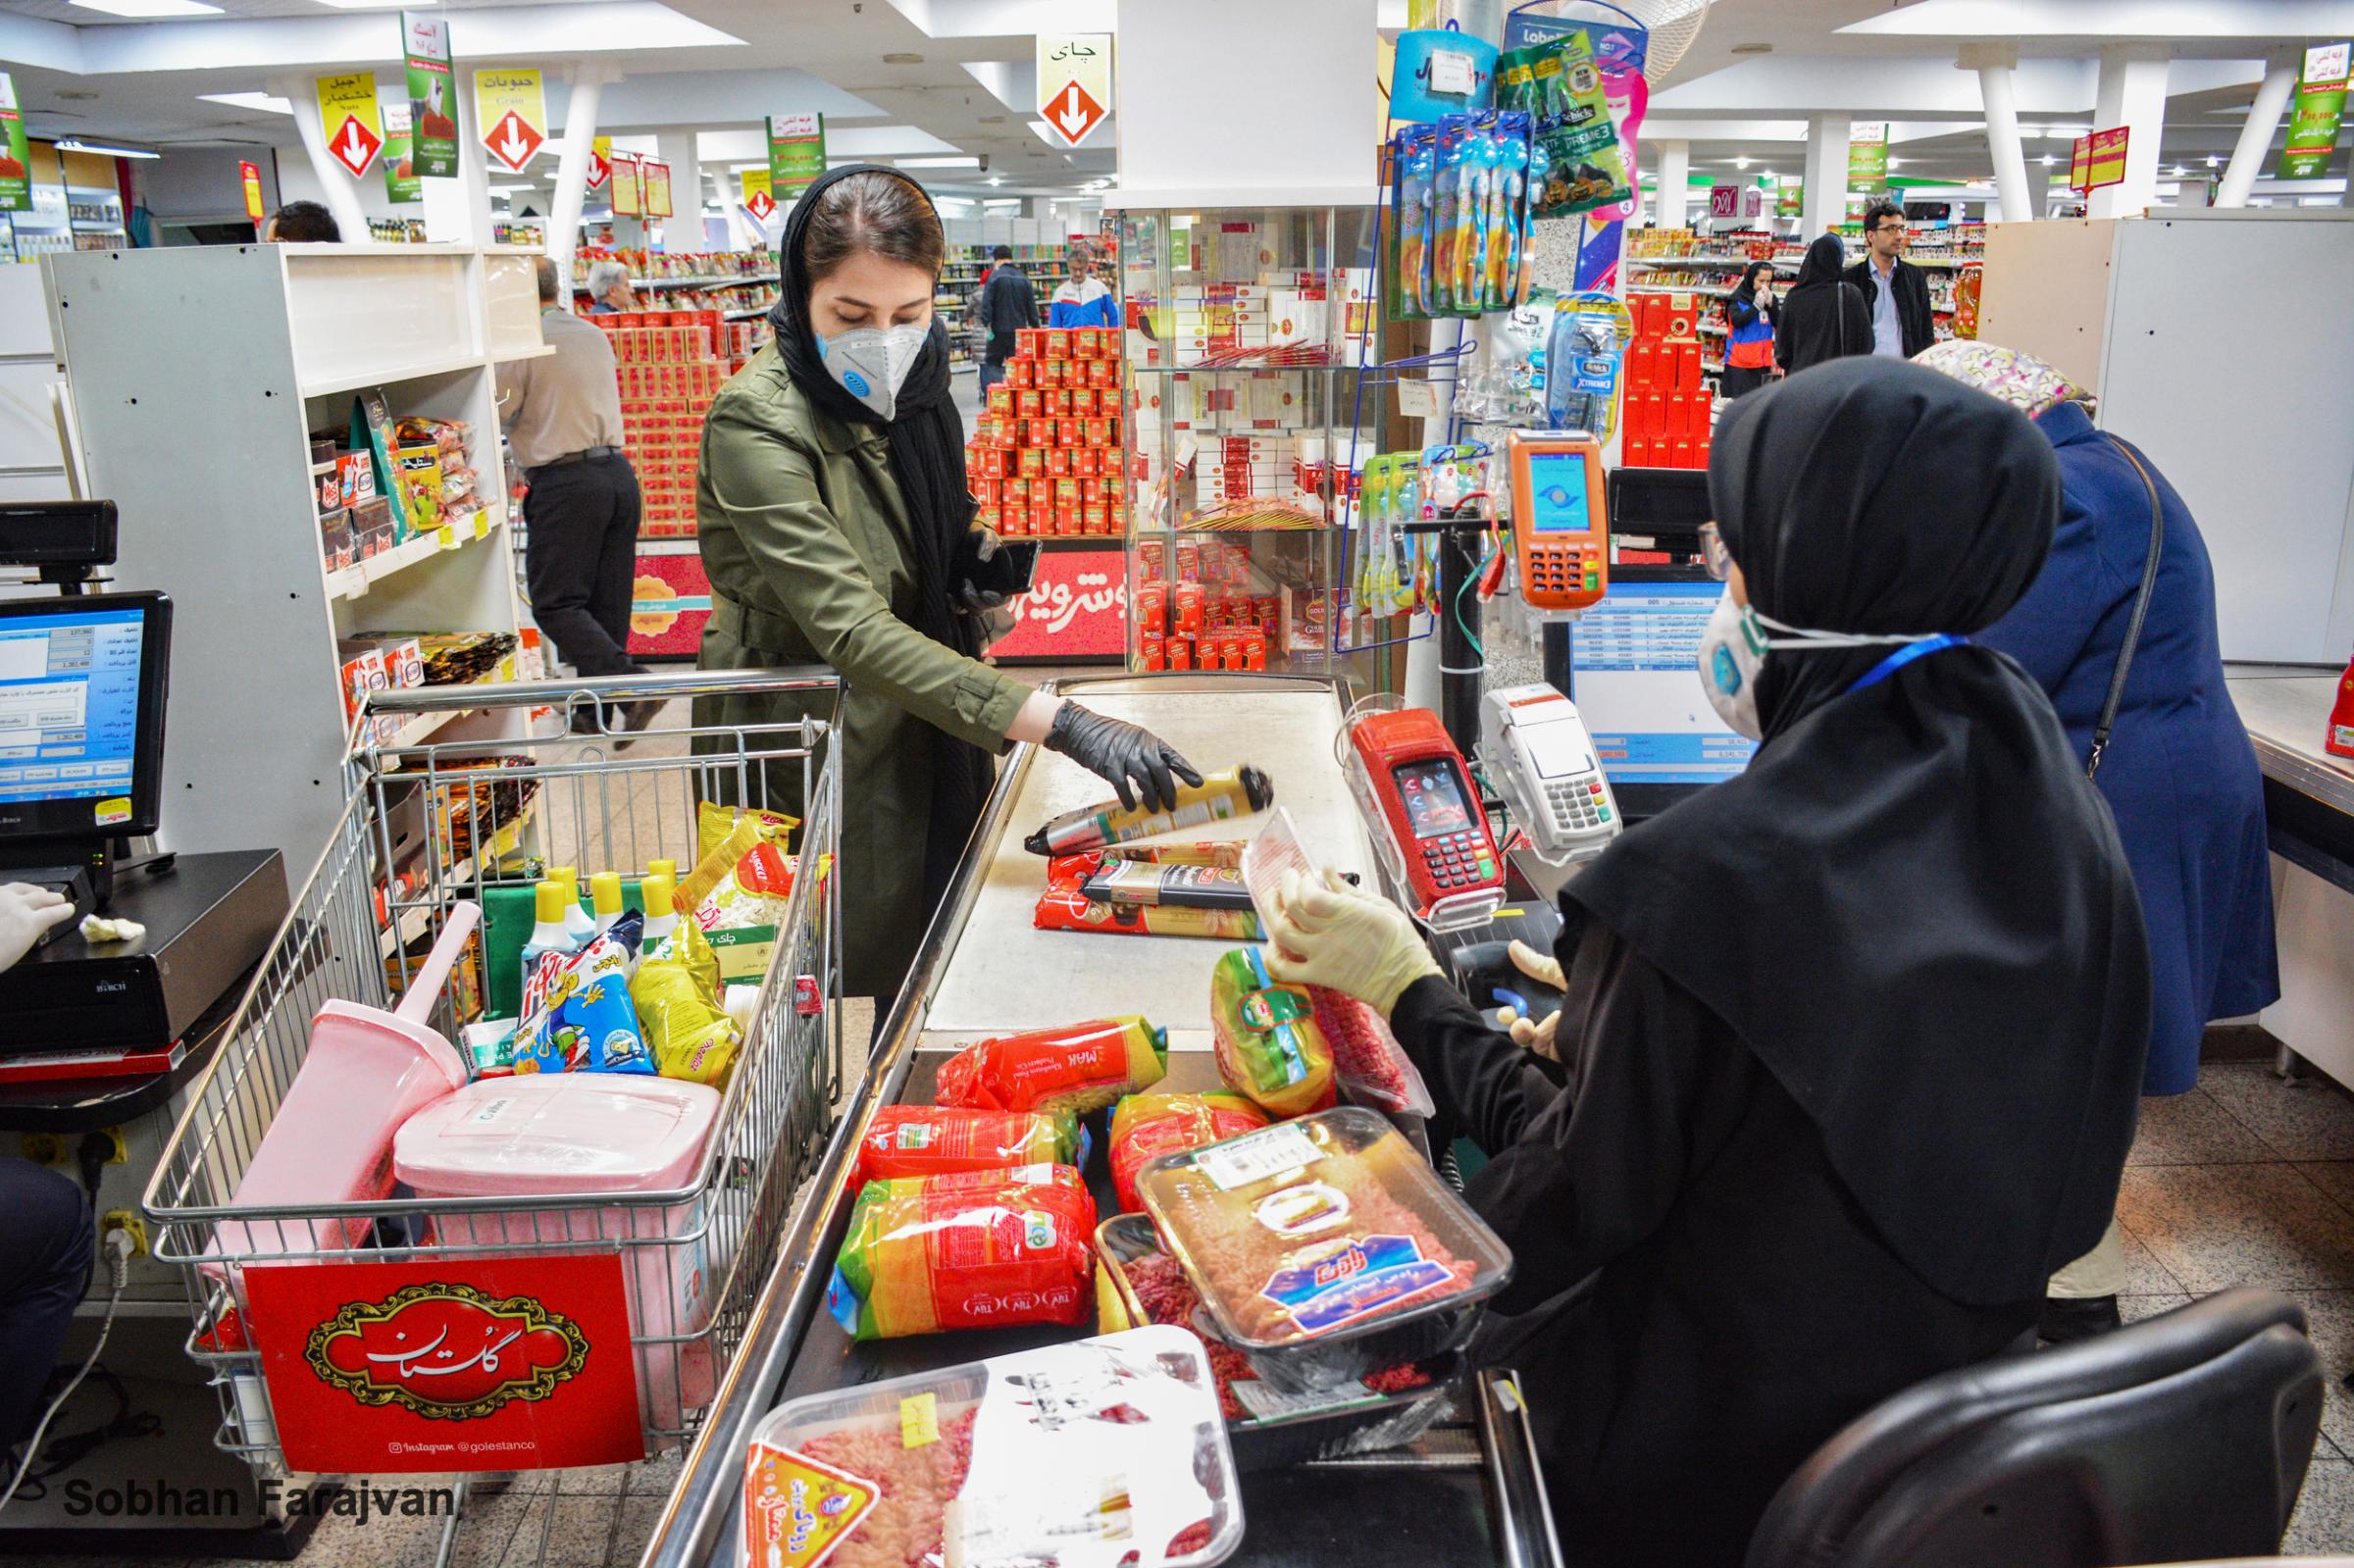 COVID-19 pandemic in Iran (2020-2022) - A woman wears a protective mask and gloves while shopping...